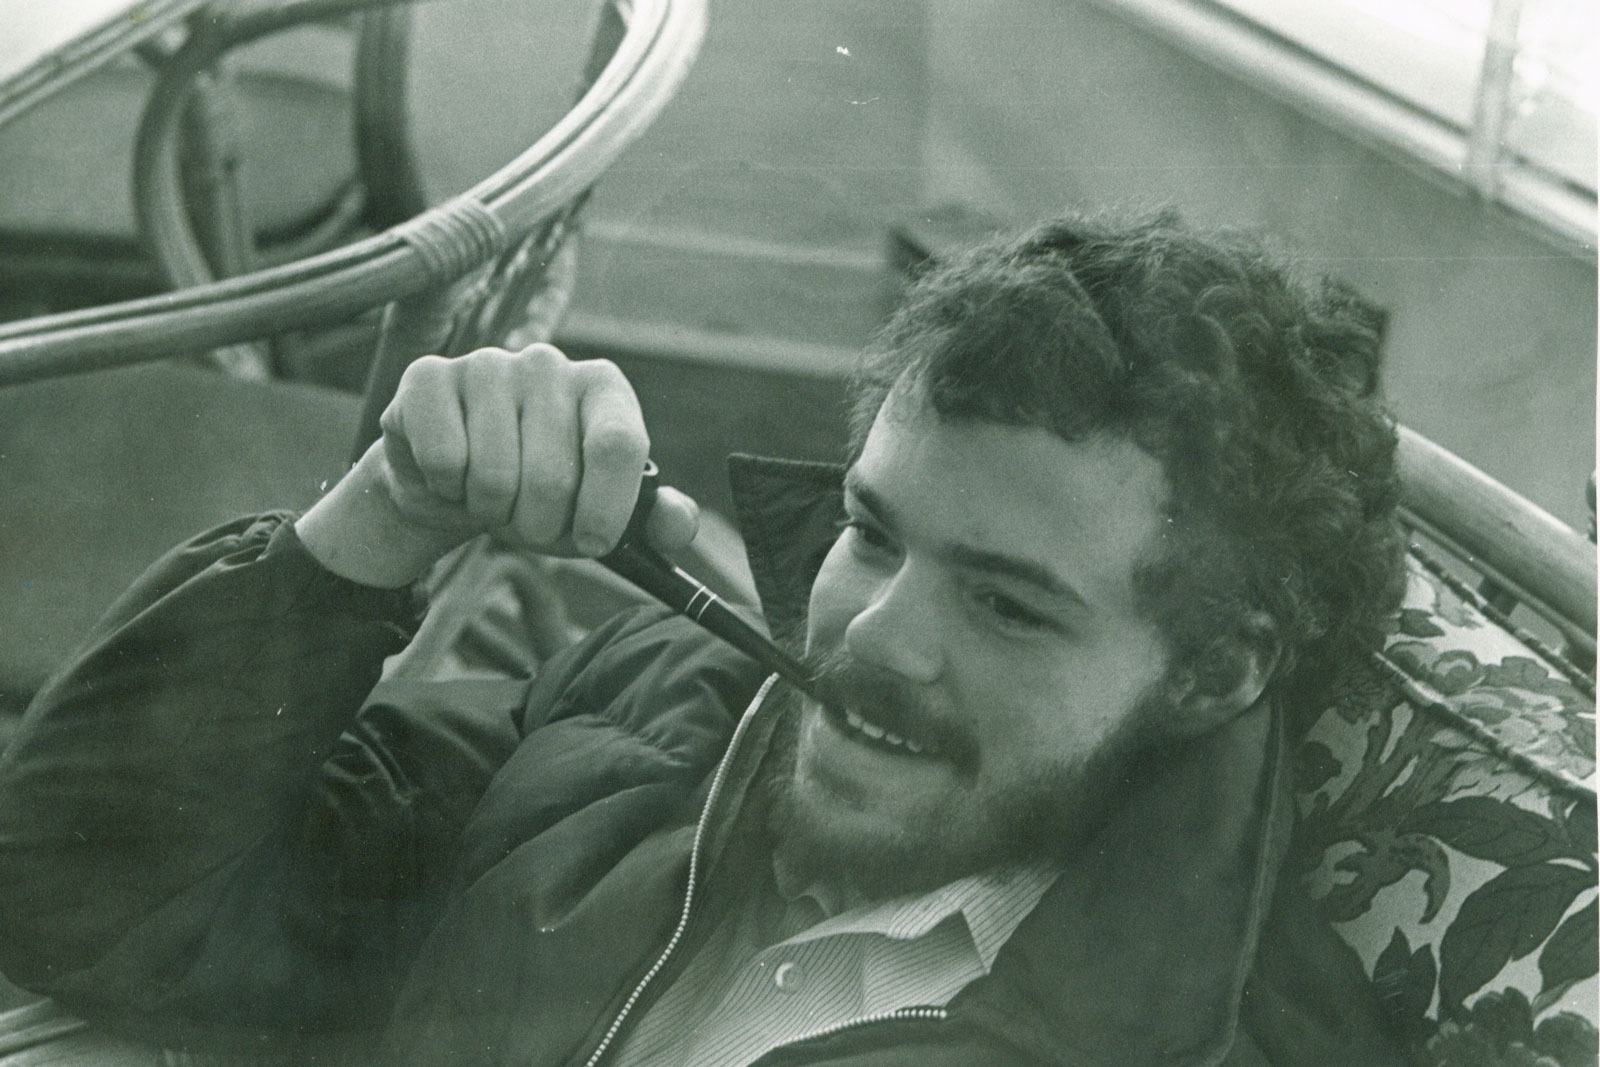 Photo of Ken Pickens. David Ford, Colorado College yearbook photographs, spring 1972, PP 19-90, Colorado College Special Collections. Gift of David Ford, CC class of 1972.